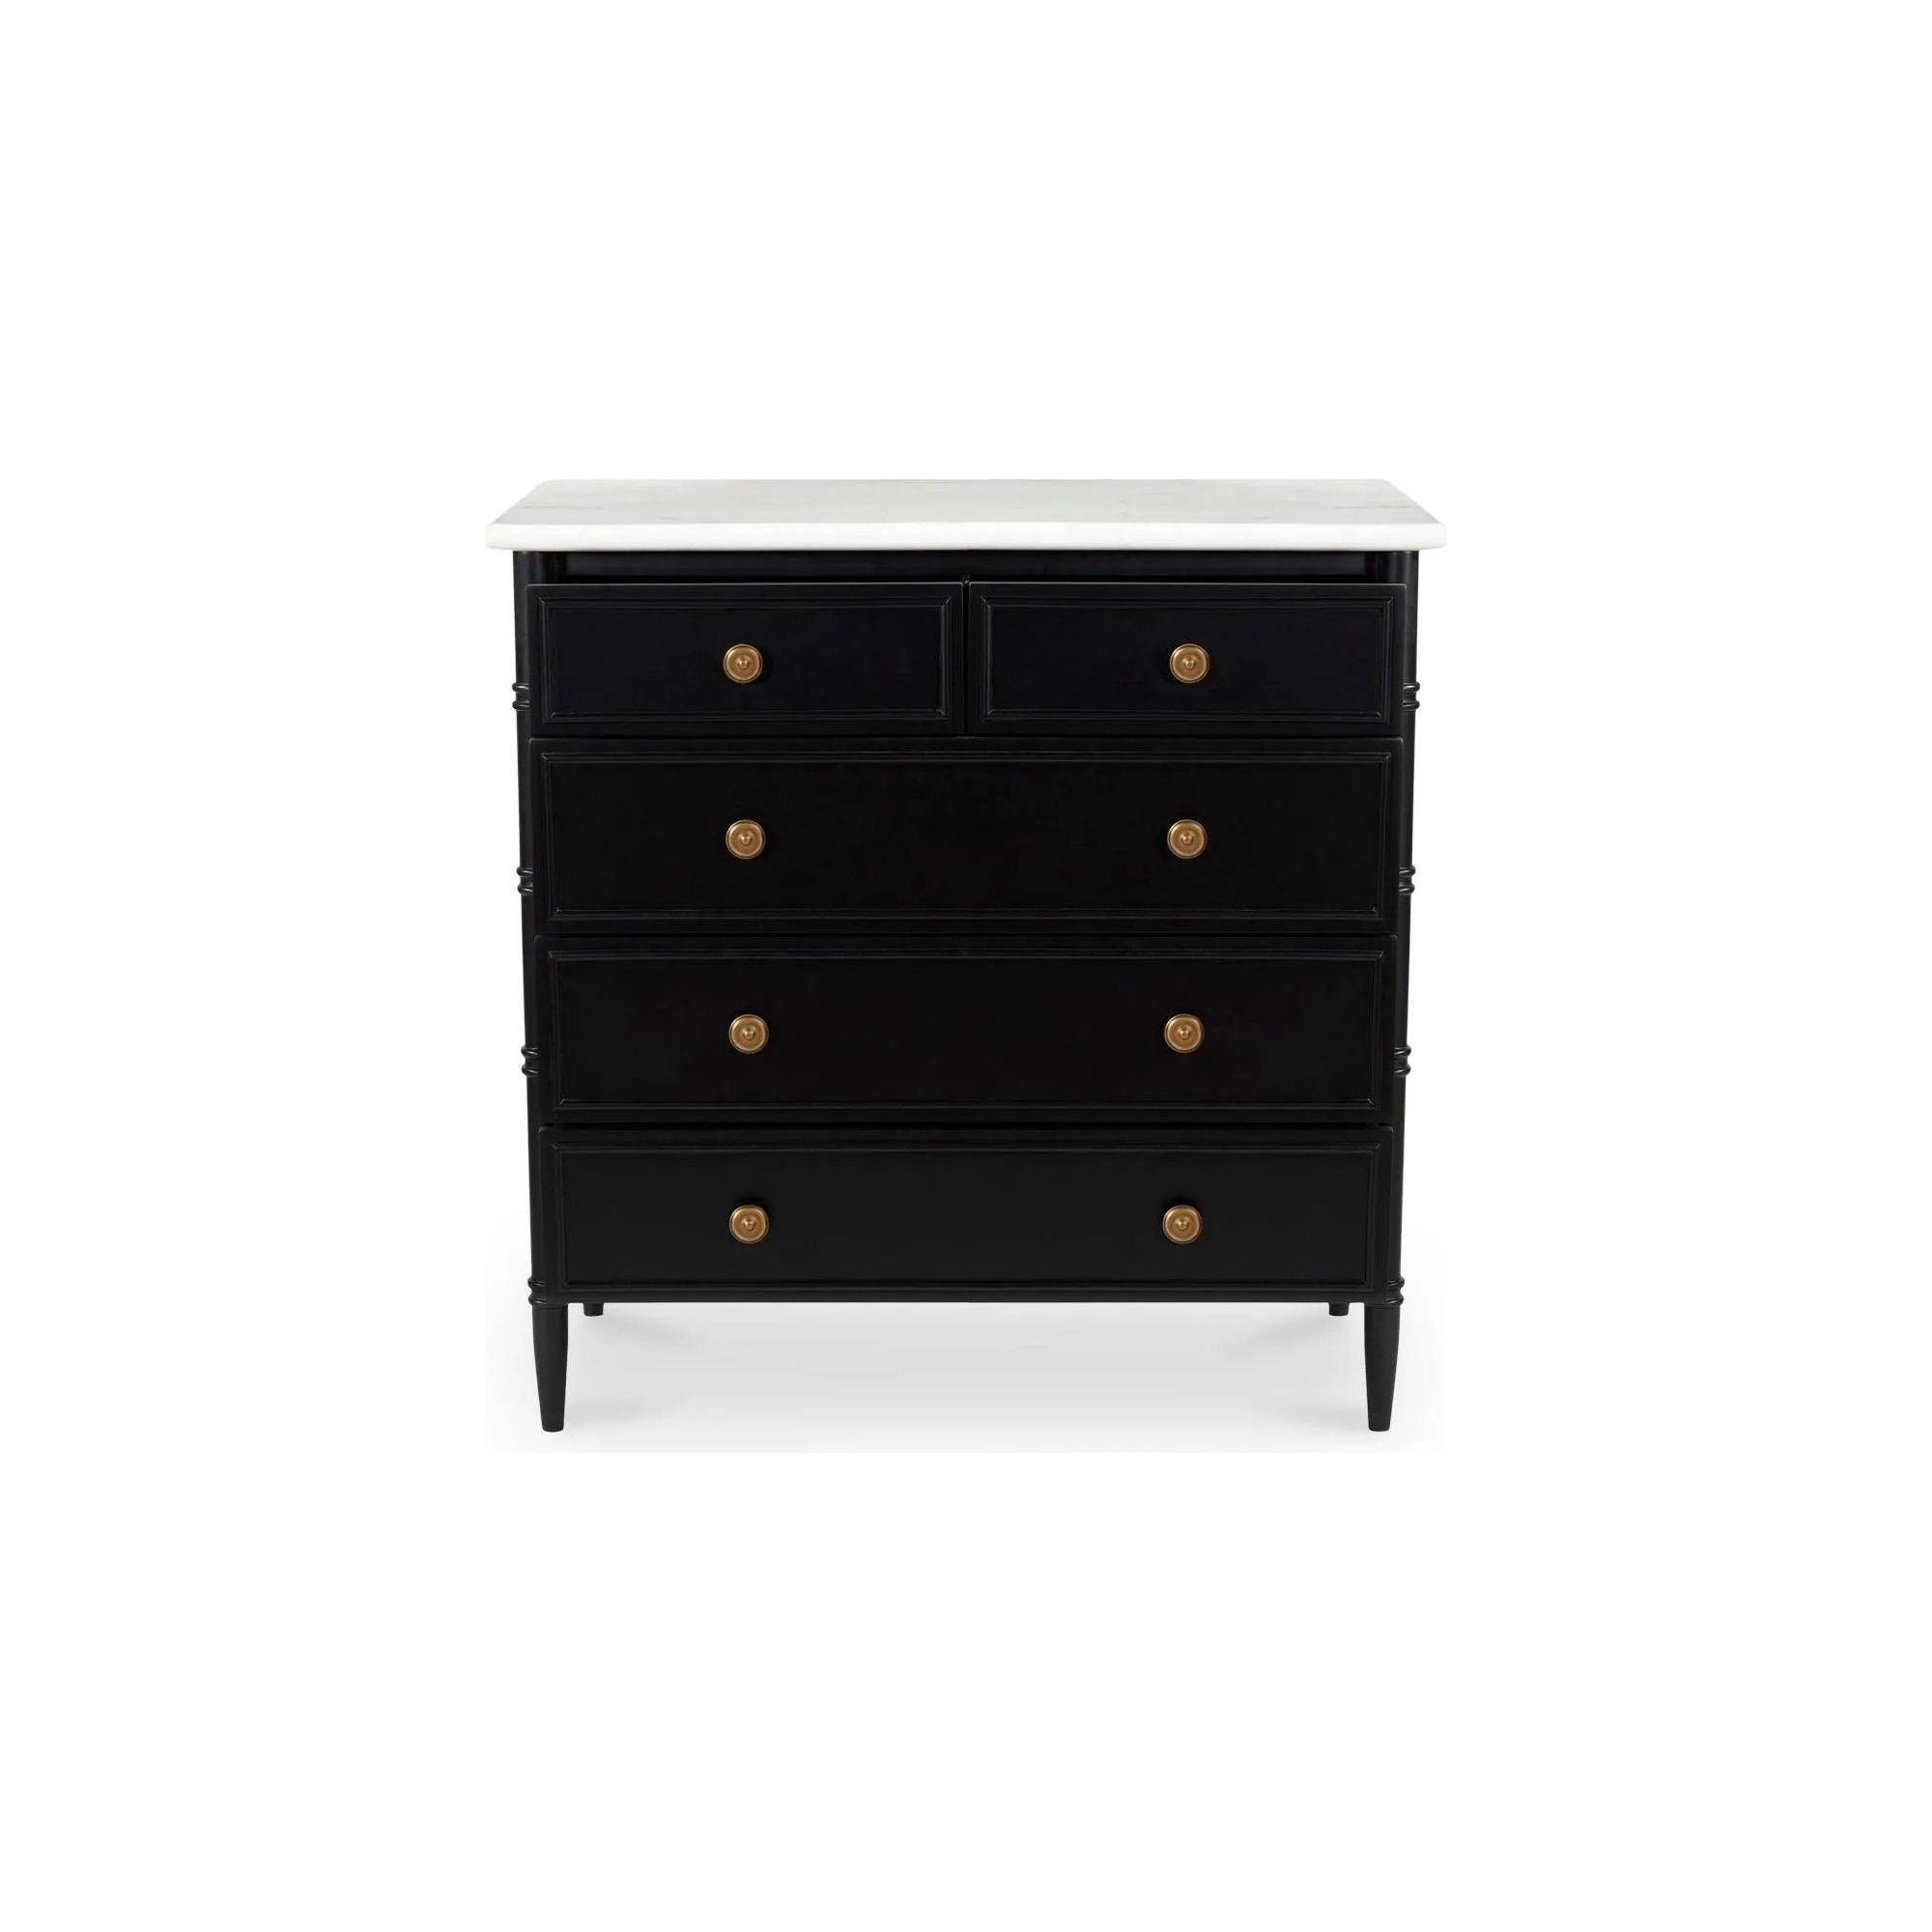 Inspired by the everyday grace of Provence style, the Eleanor 5-drawer chest showcases a classically graceful profile with distinctive turned details. Amethyst Home provides interior design, new home construction design consulting, vintage area rugs, and lighting in the Salt Lake City metro area.